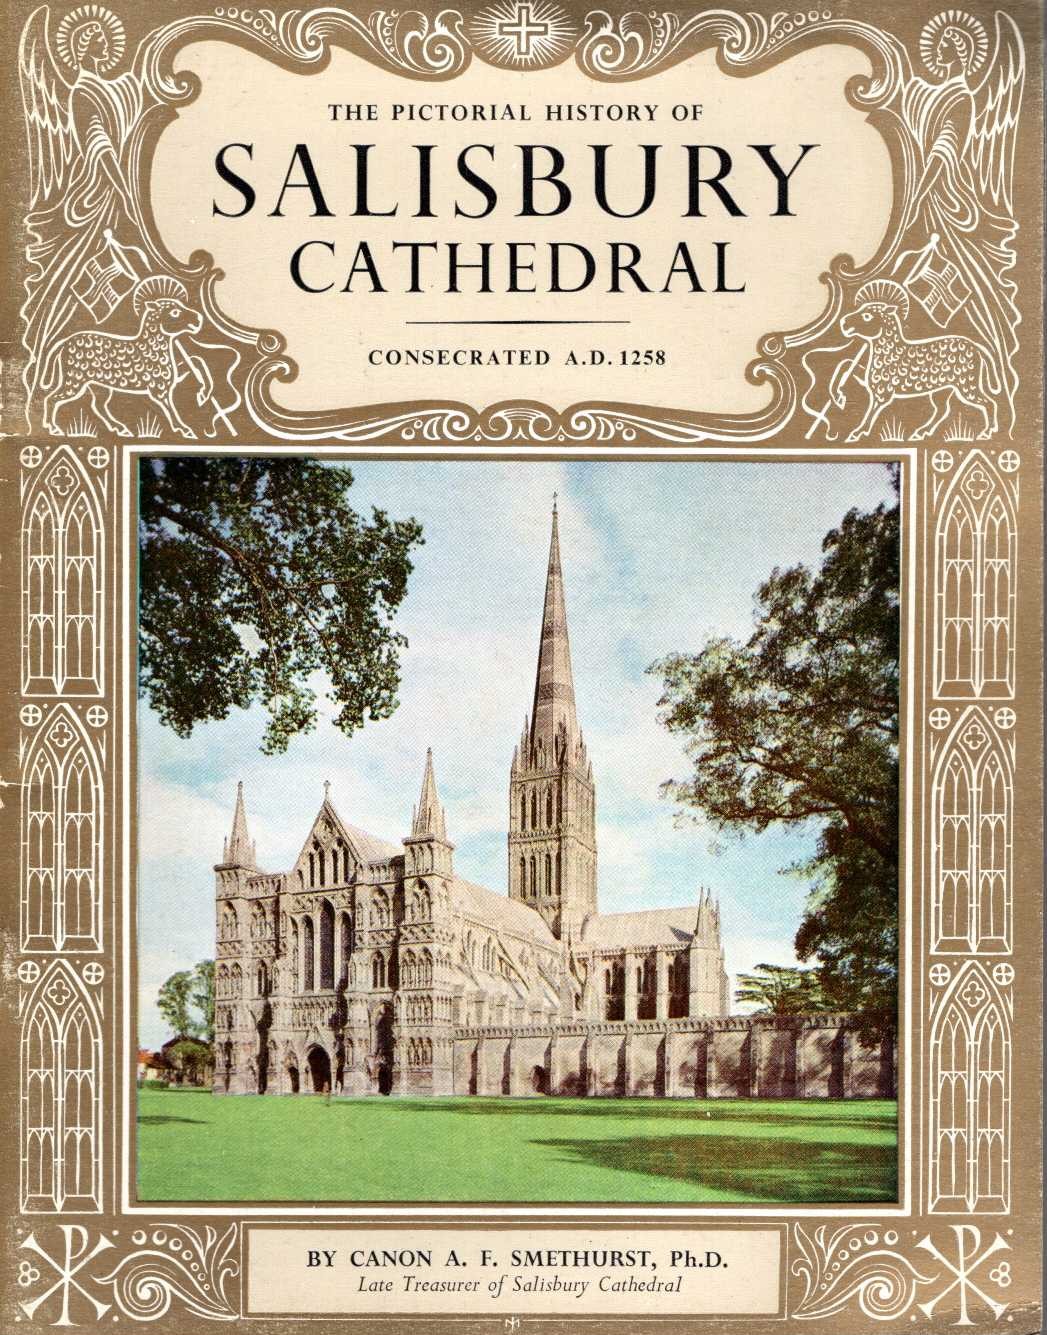 SALISBURY CATHEDRAL, The Pictorial History of by Canon A.F.Smethurst Ph.D. front book cover image